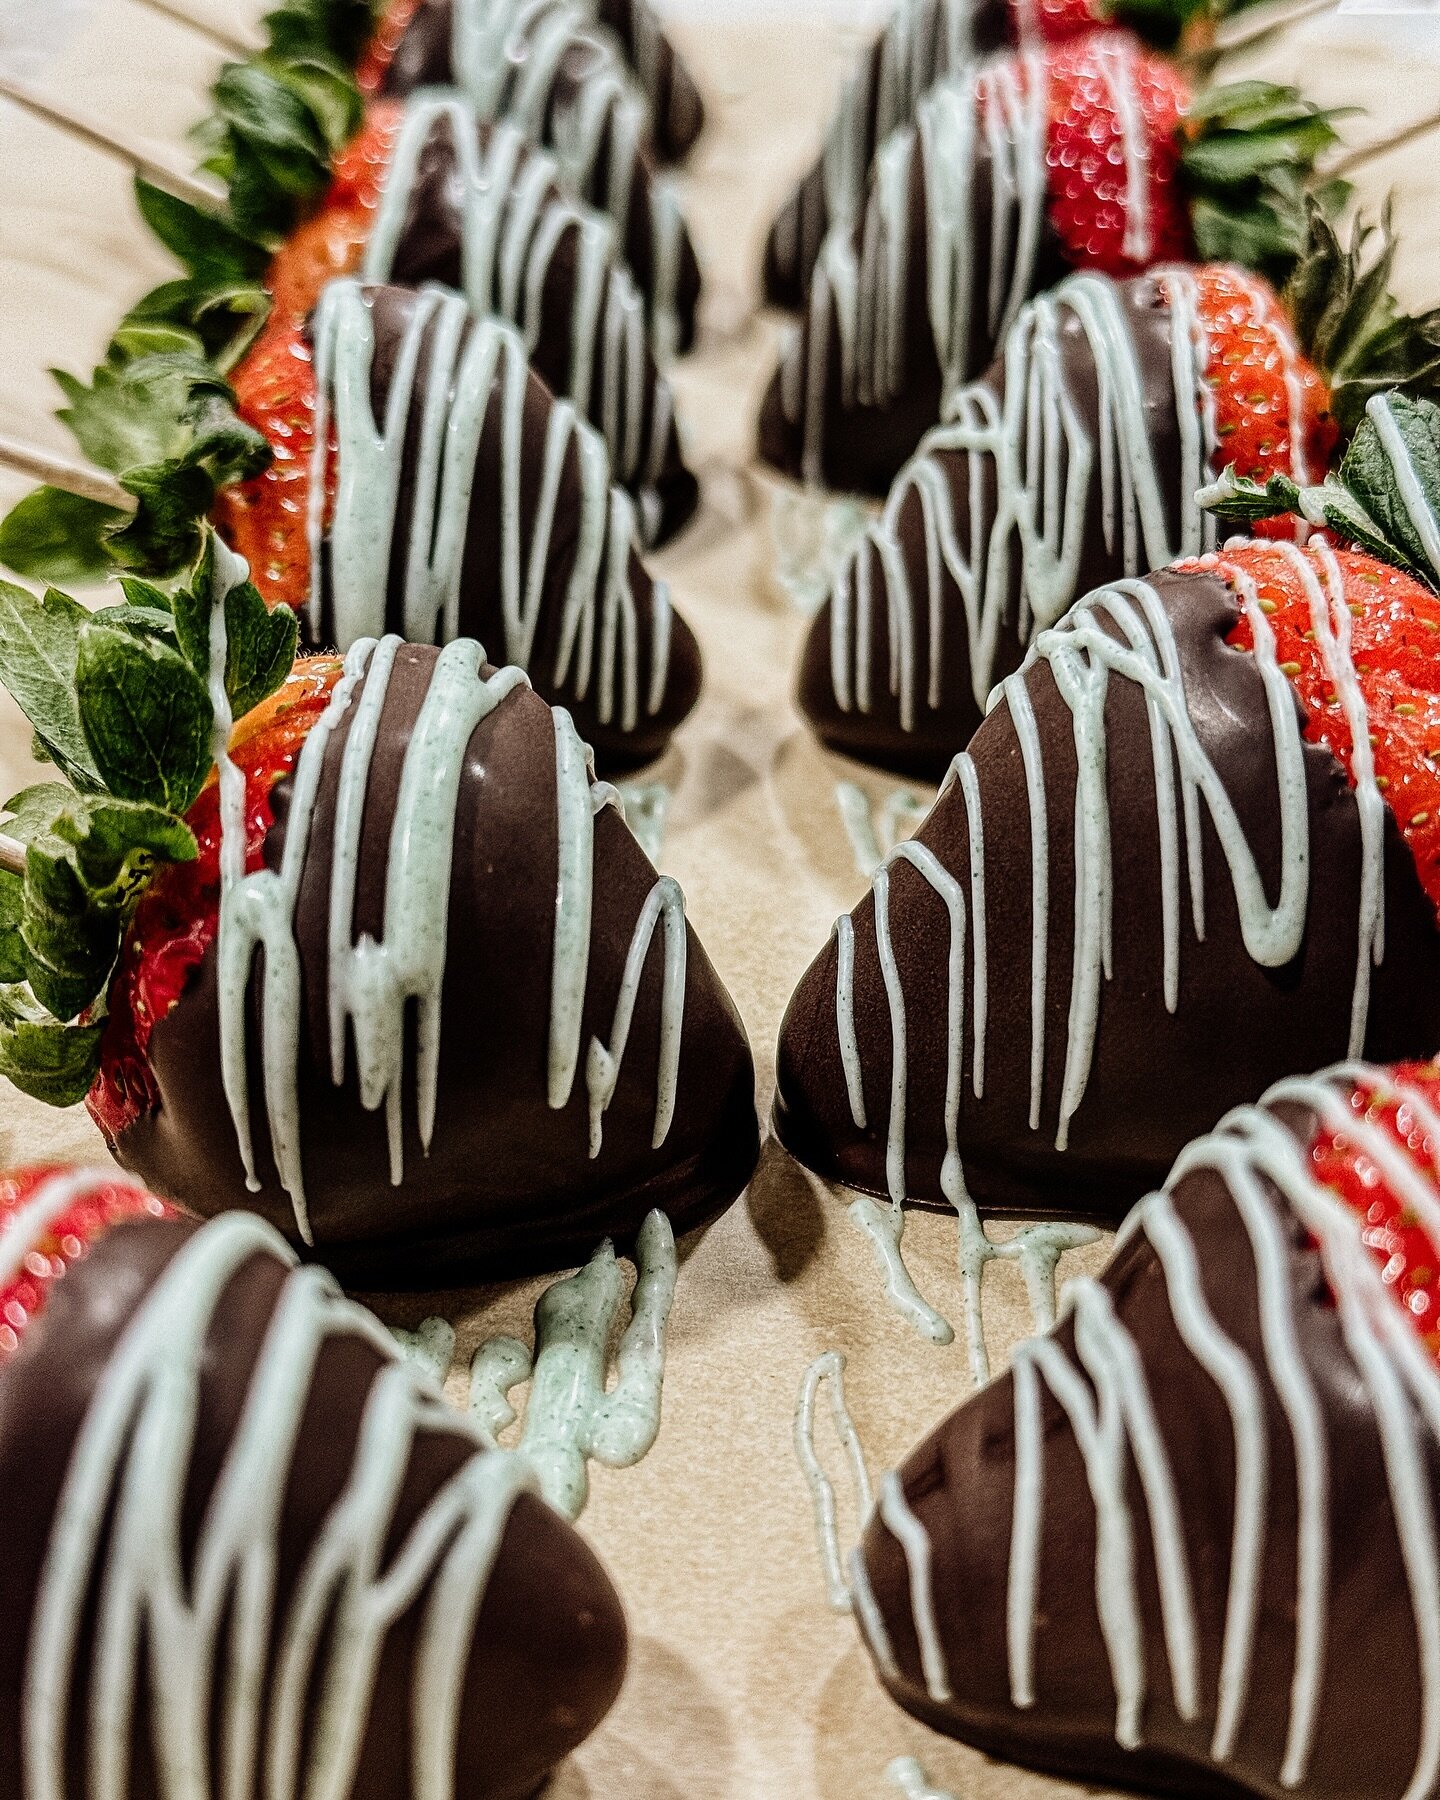 Who else only enjoys strawberries if they&rsquo;re covered in chocolate? 👀 

🍓 
🍓
🍓 

#grazingtable #grazingboard #charcuterie #dessertboard #dessertporn #dessertcharcuterie #catering #boisecatering #idahocatering #charcuterieboards #charcuterieb